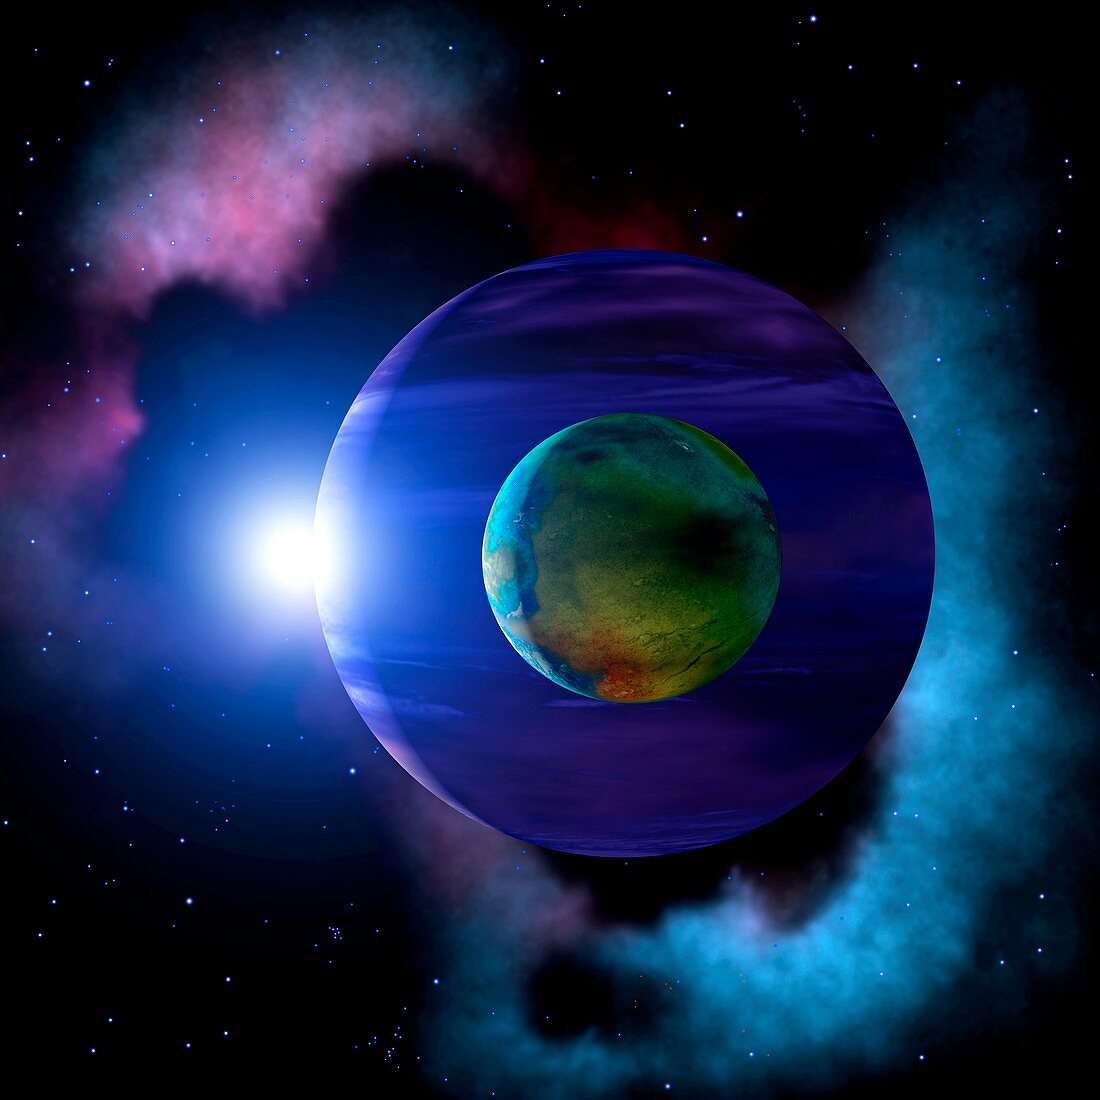 Exoplanet and moon,illustration